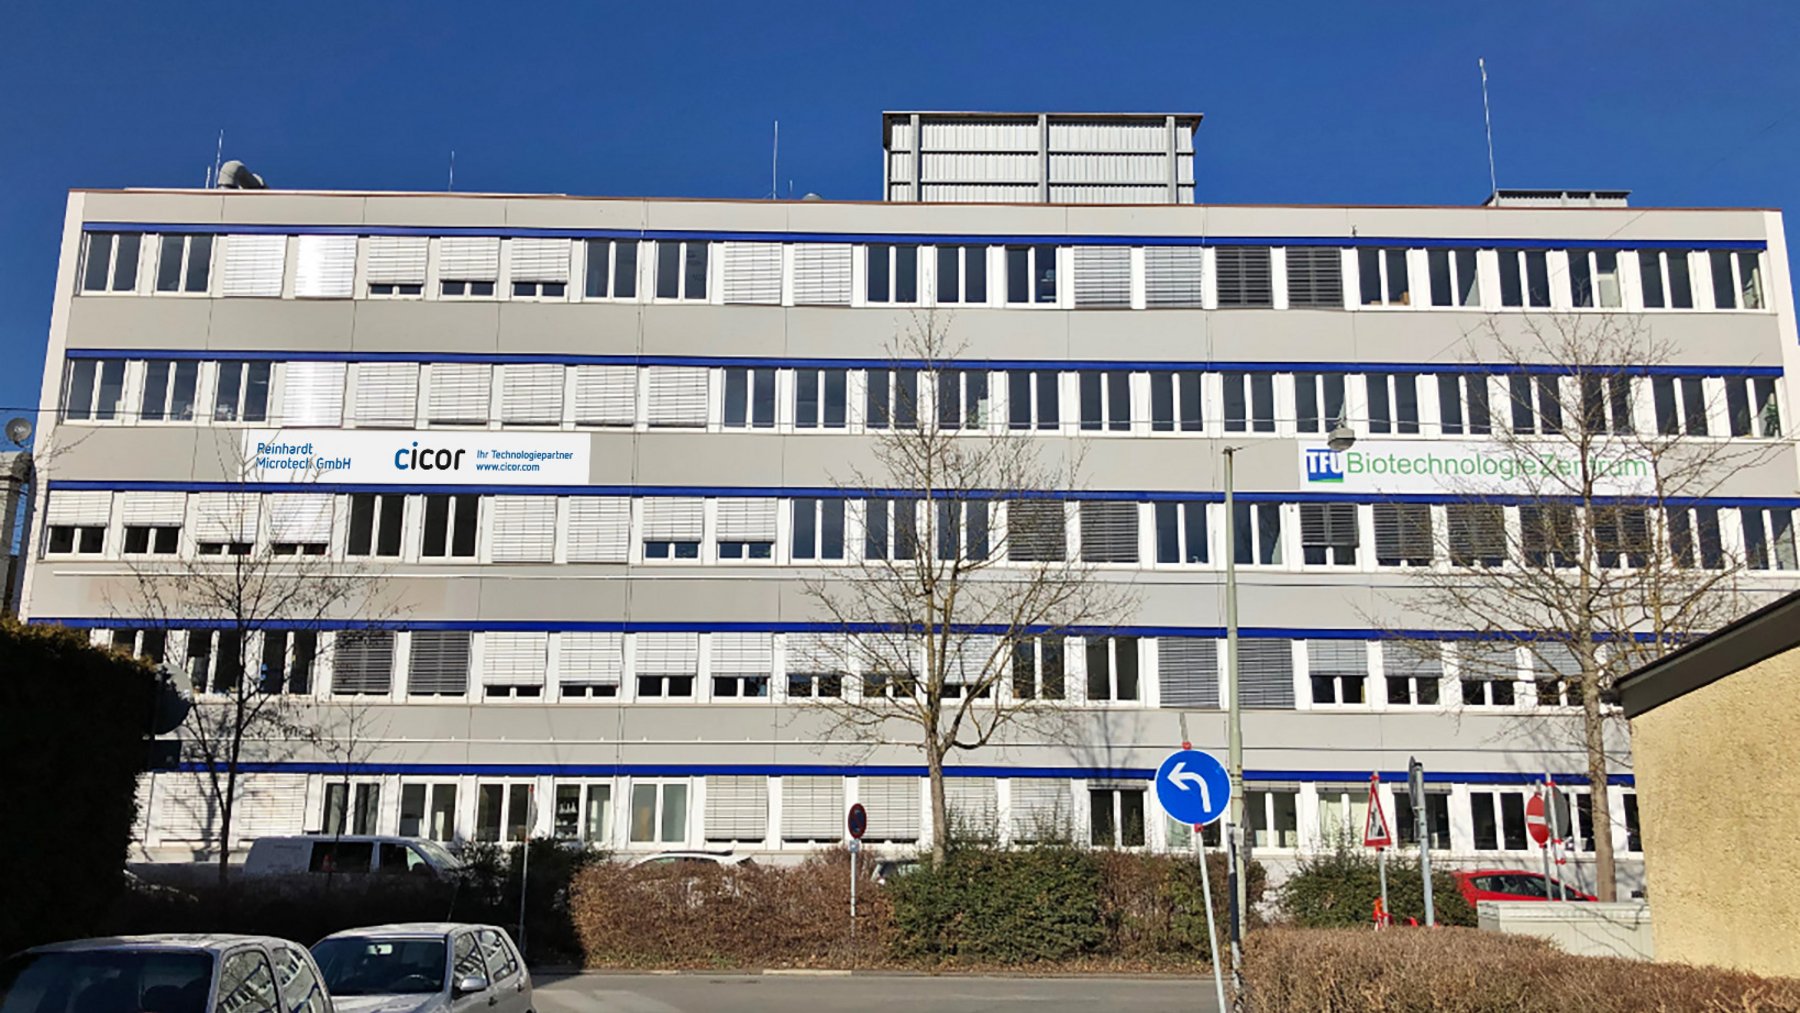 Cicor production site in Ulm, Germany